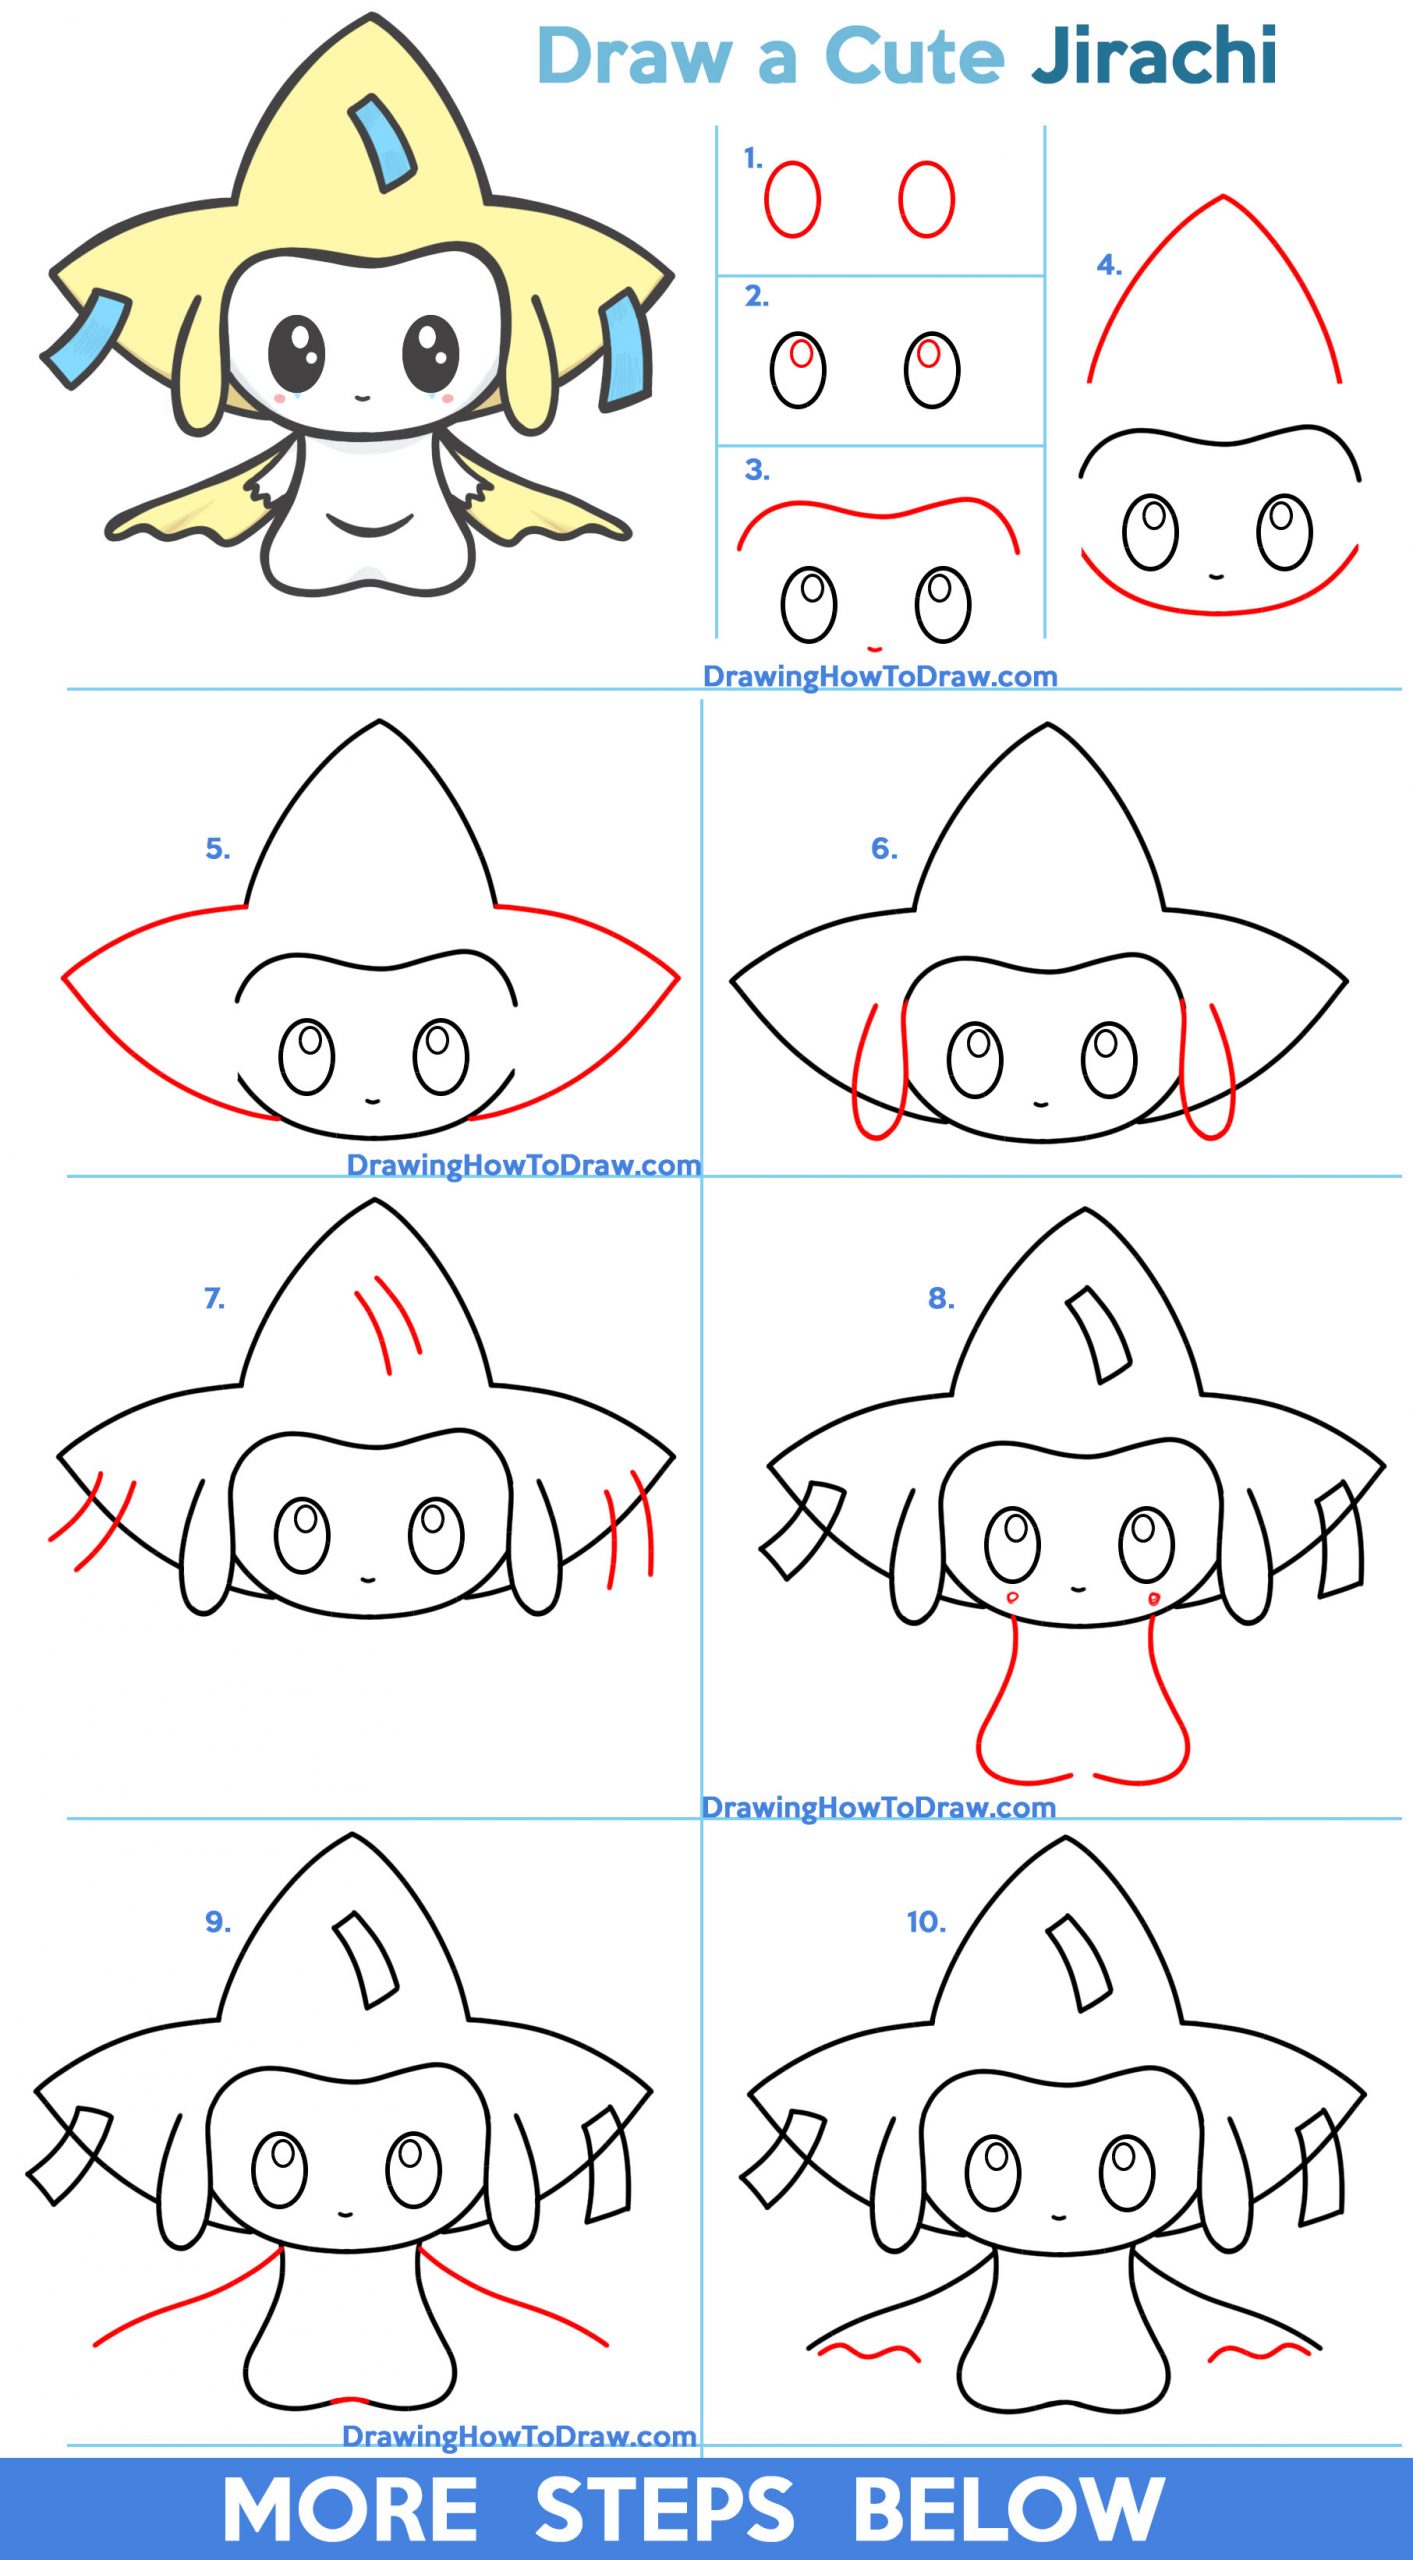 How to Draw Cute Kawaii Chibi Umbreon from Pokemon Easy Step by Step  Drawing Tutorial for Kids – How to Draw Step by Step Drawing Tutorials | Easy  pokemon drawings, Drawing tutorials